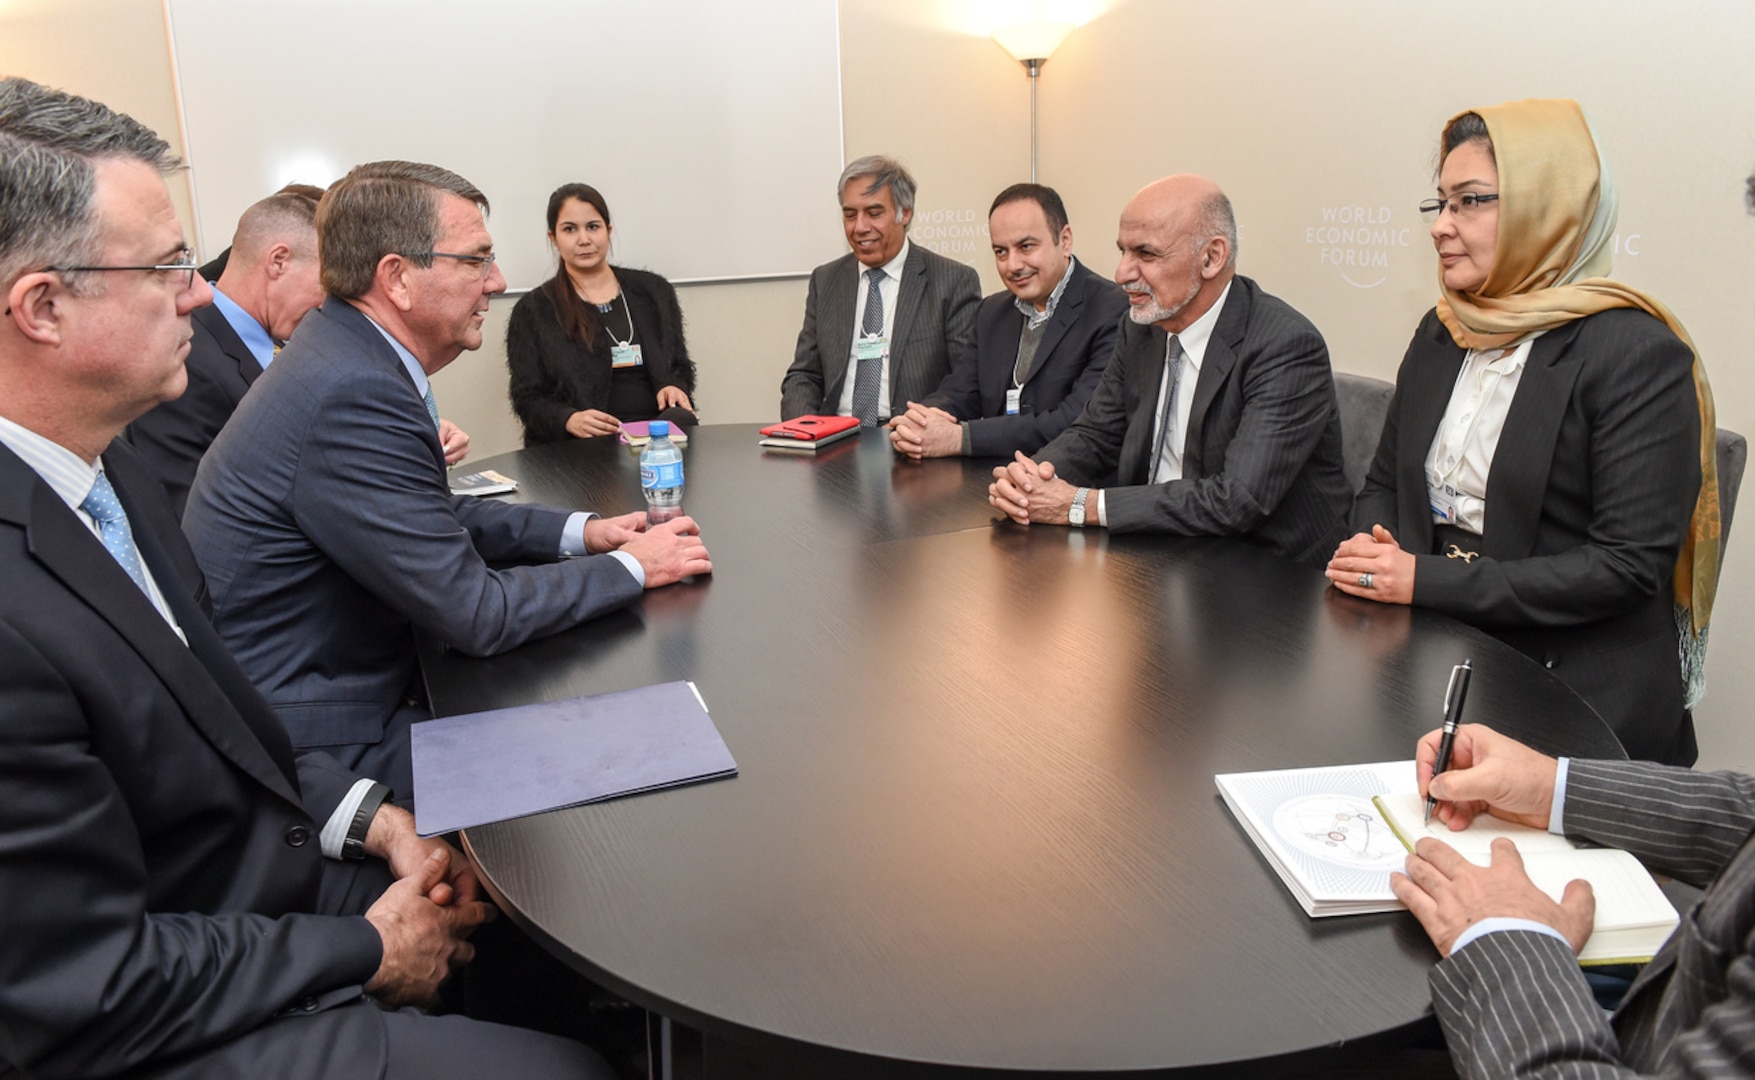 U.S. Defense Secretary Ash Carter meets with Afghan President Ashraf Ghani, second from right, in Davos, Switzerland, earlier this year. (DoD photo by Army Sgt. 1st Class Clydell Kinchen)